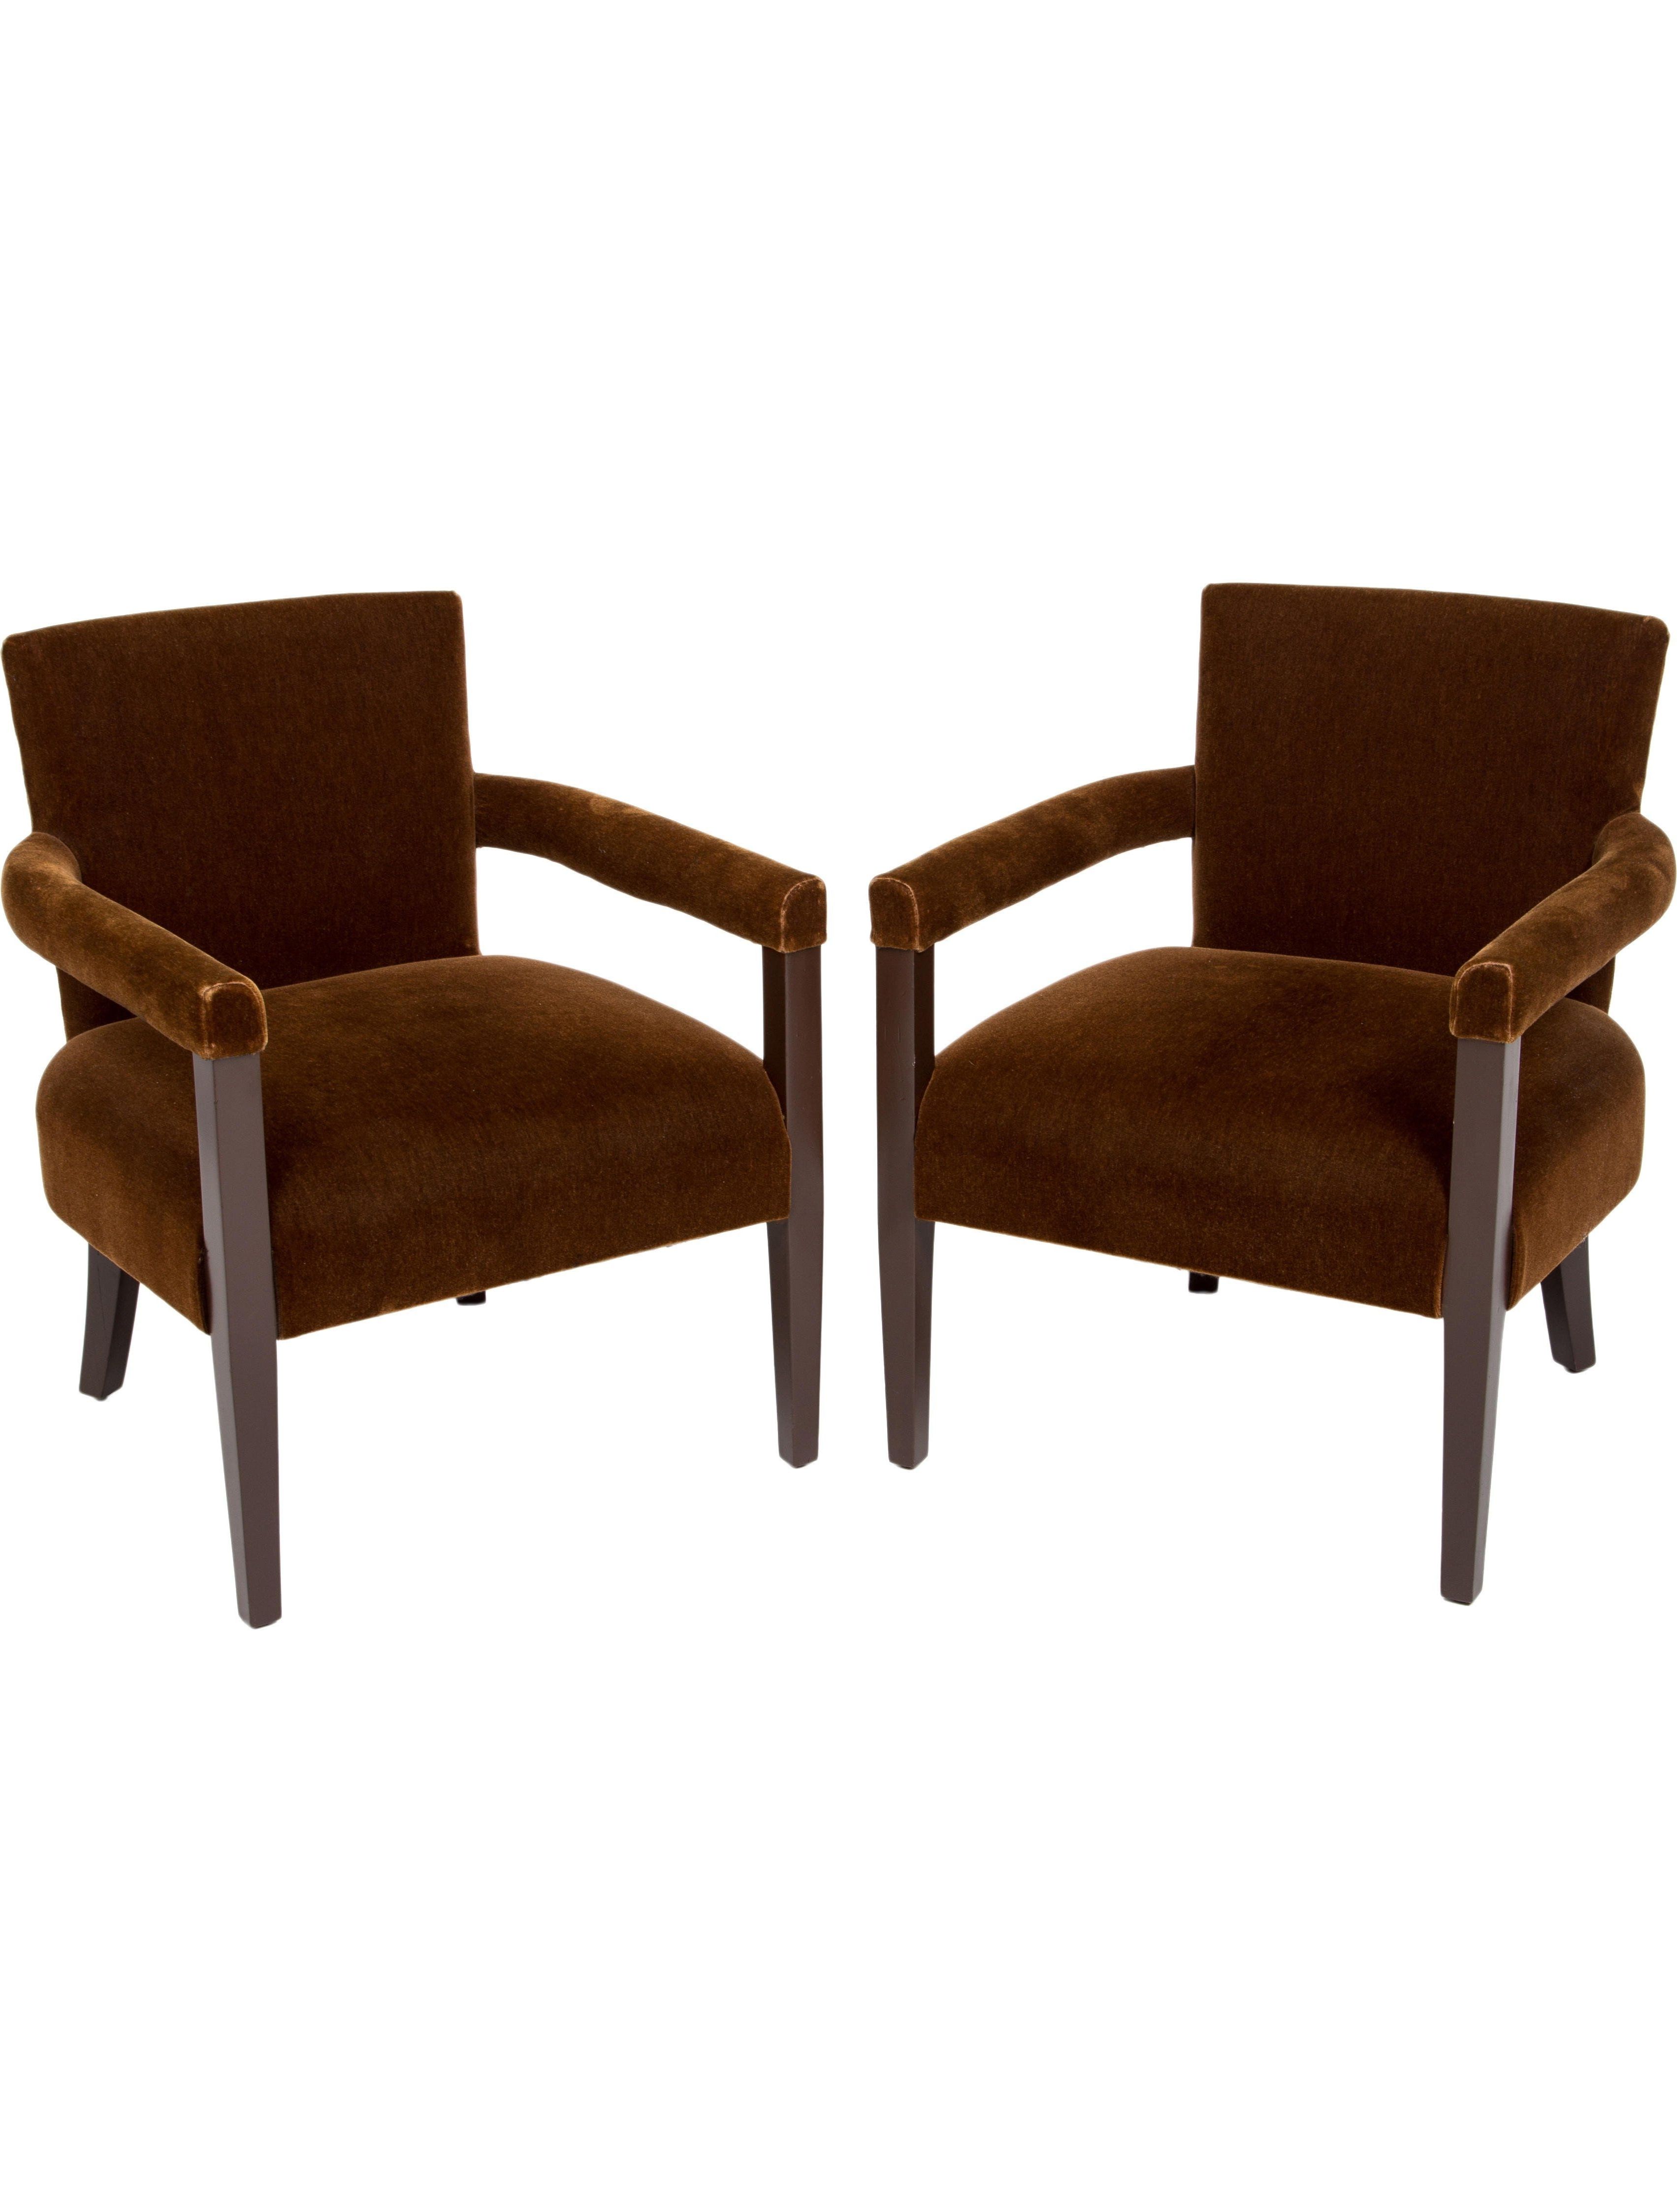 Pair Of Brown Velvet Armchairs With Broad Seats, Squared Backs Throughout Popular Bale 6 Piece Dining Sets With Dom Side Chairs (View 5 of 25)